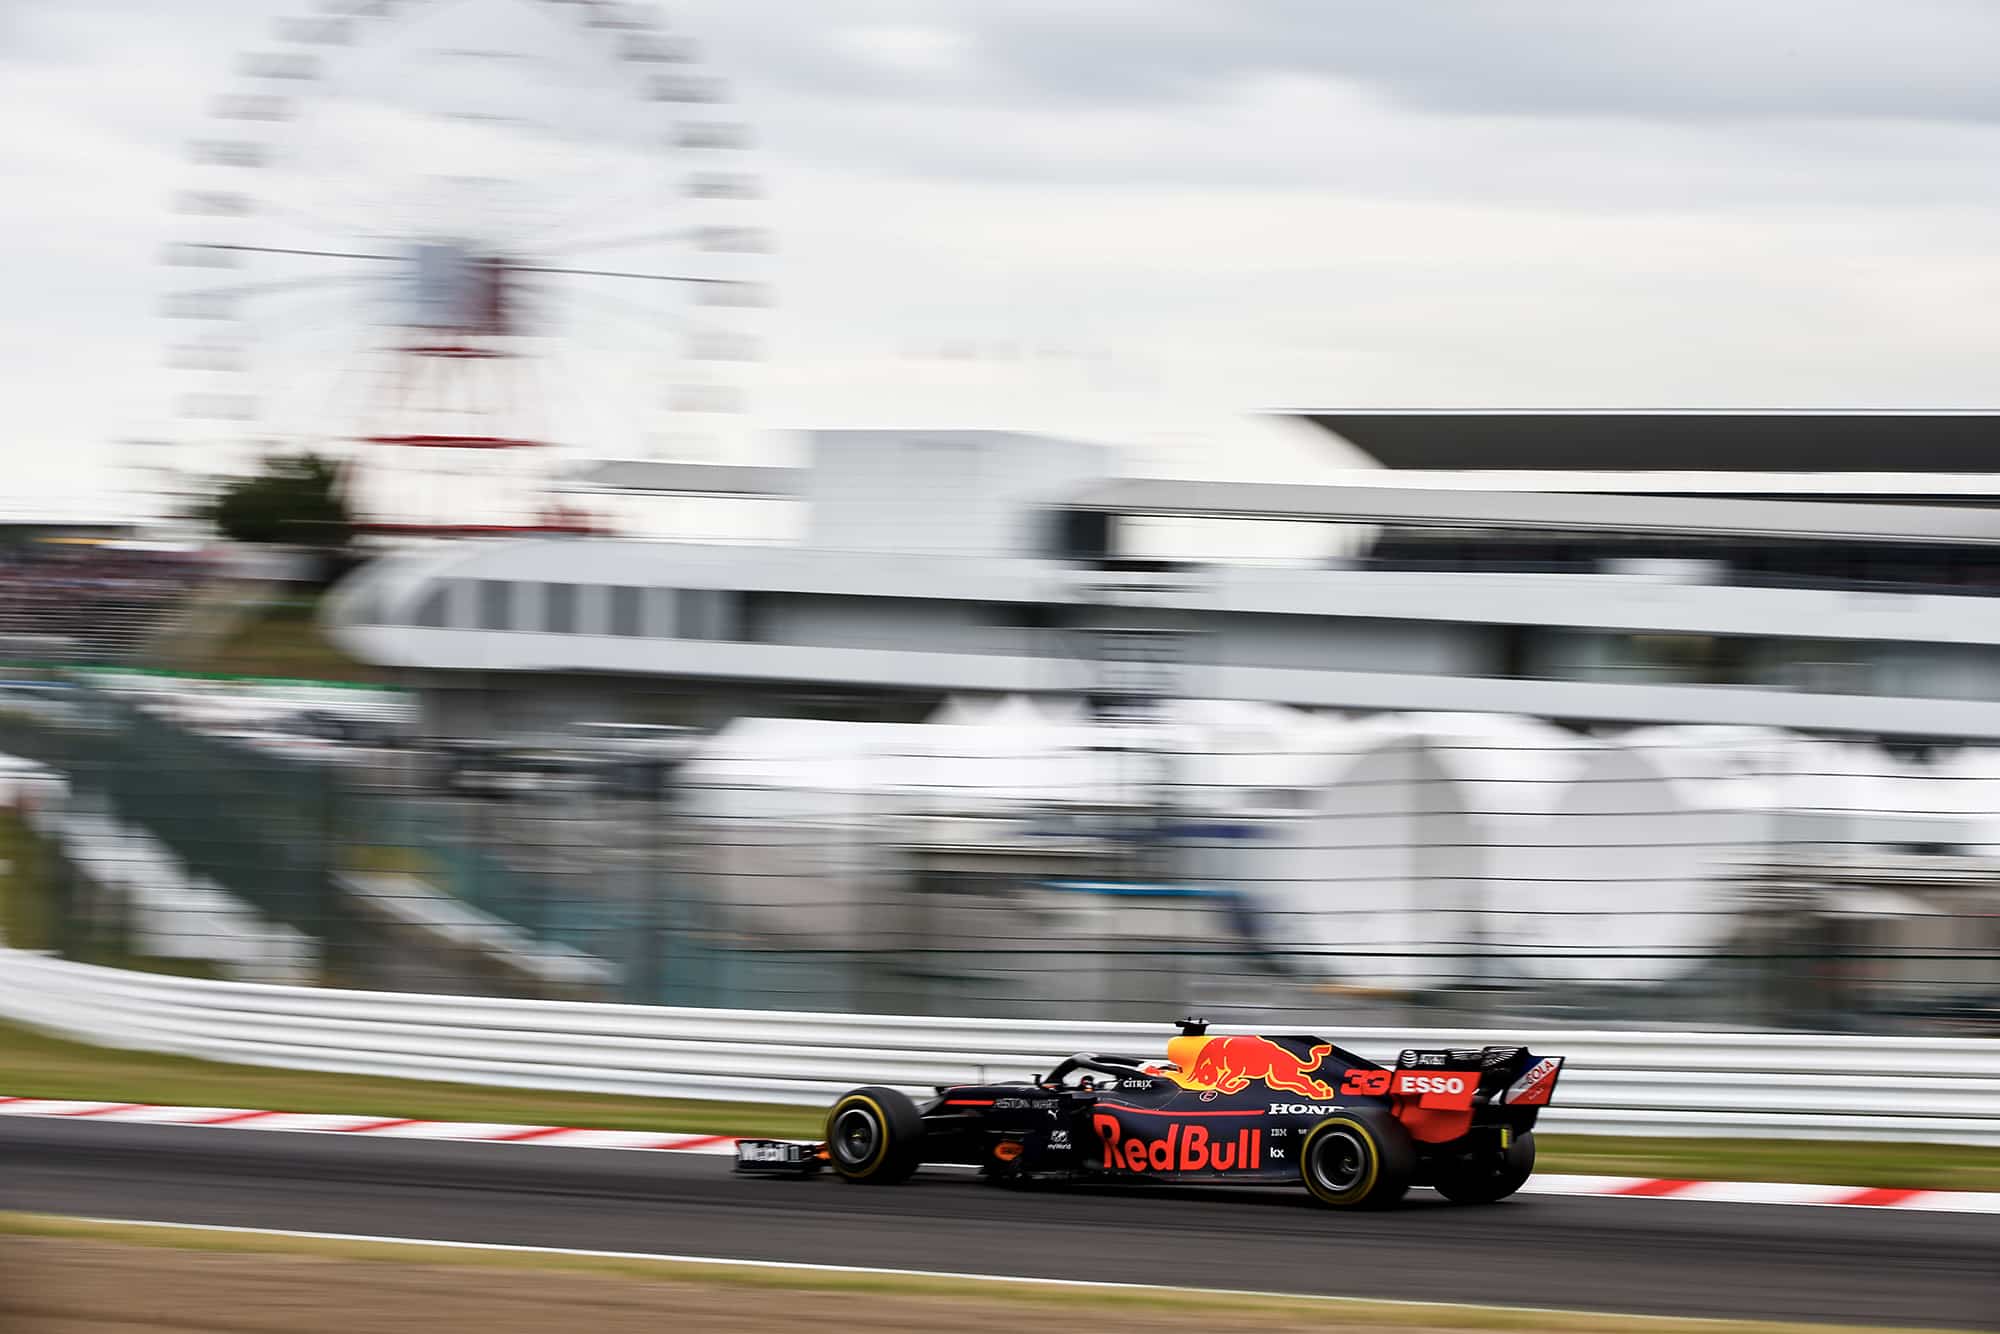 Max Verstappen in the Red Bull RB15 during FP1 for the 2019 Japanese Grand Prix